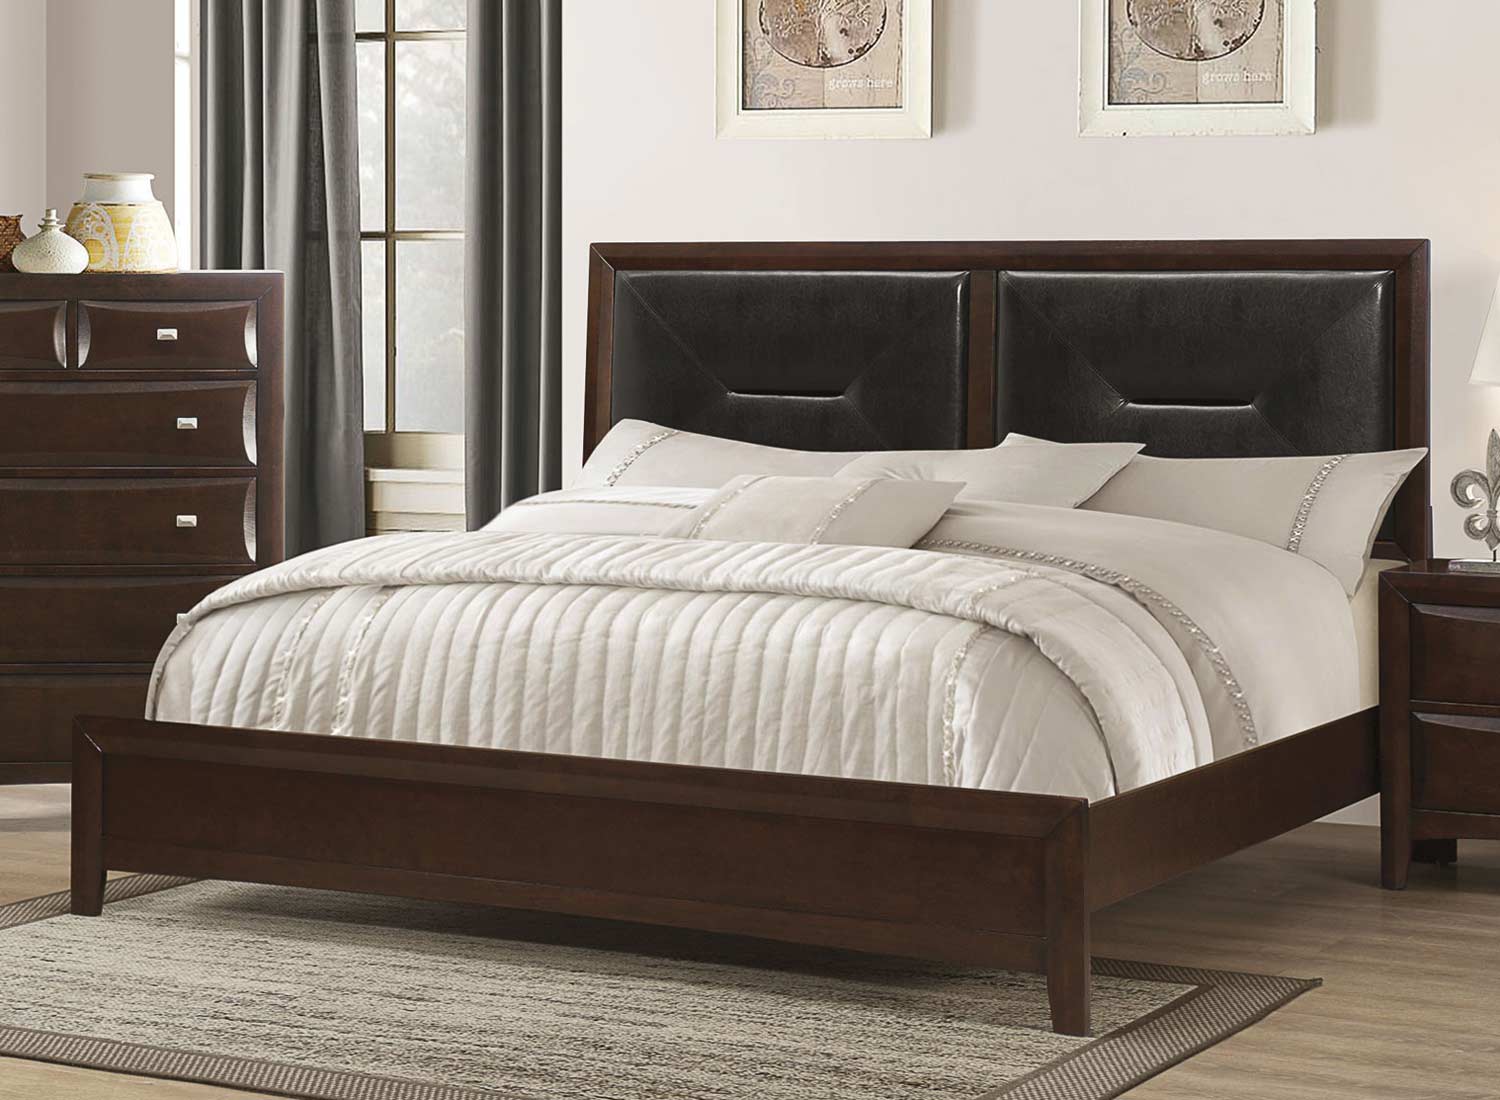 Coaster Cloverdale Upholstered Bed - Cappuccino